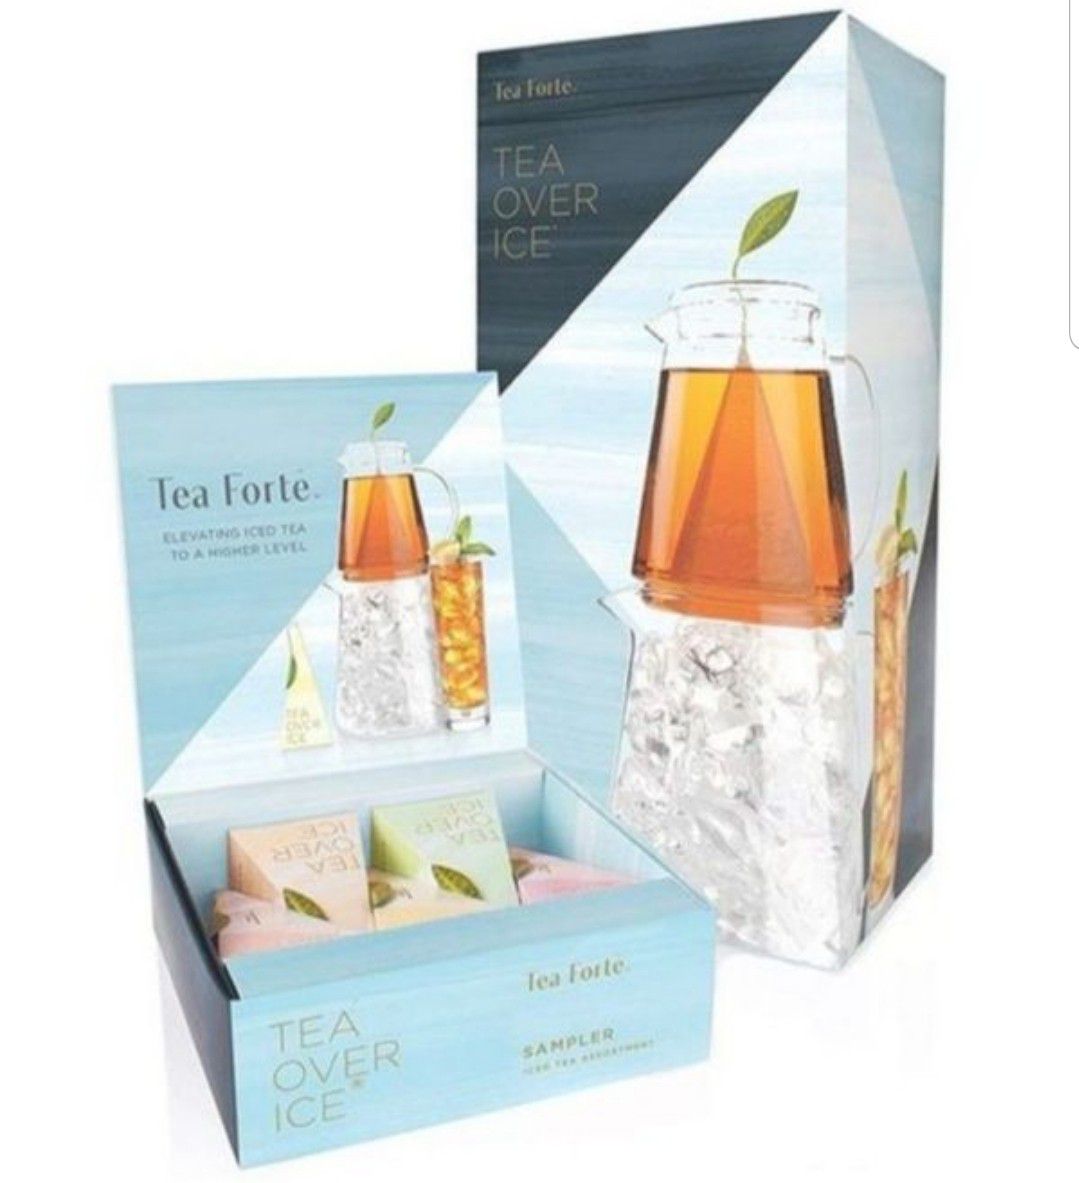 Tea Forte TEA OVER ICE Steeping Tea Pitcher Set and Iced Tea Infuser Sampler Box with 5 Different Tea Blends